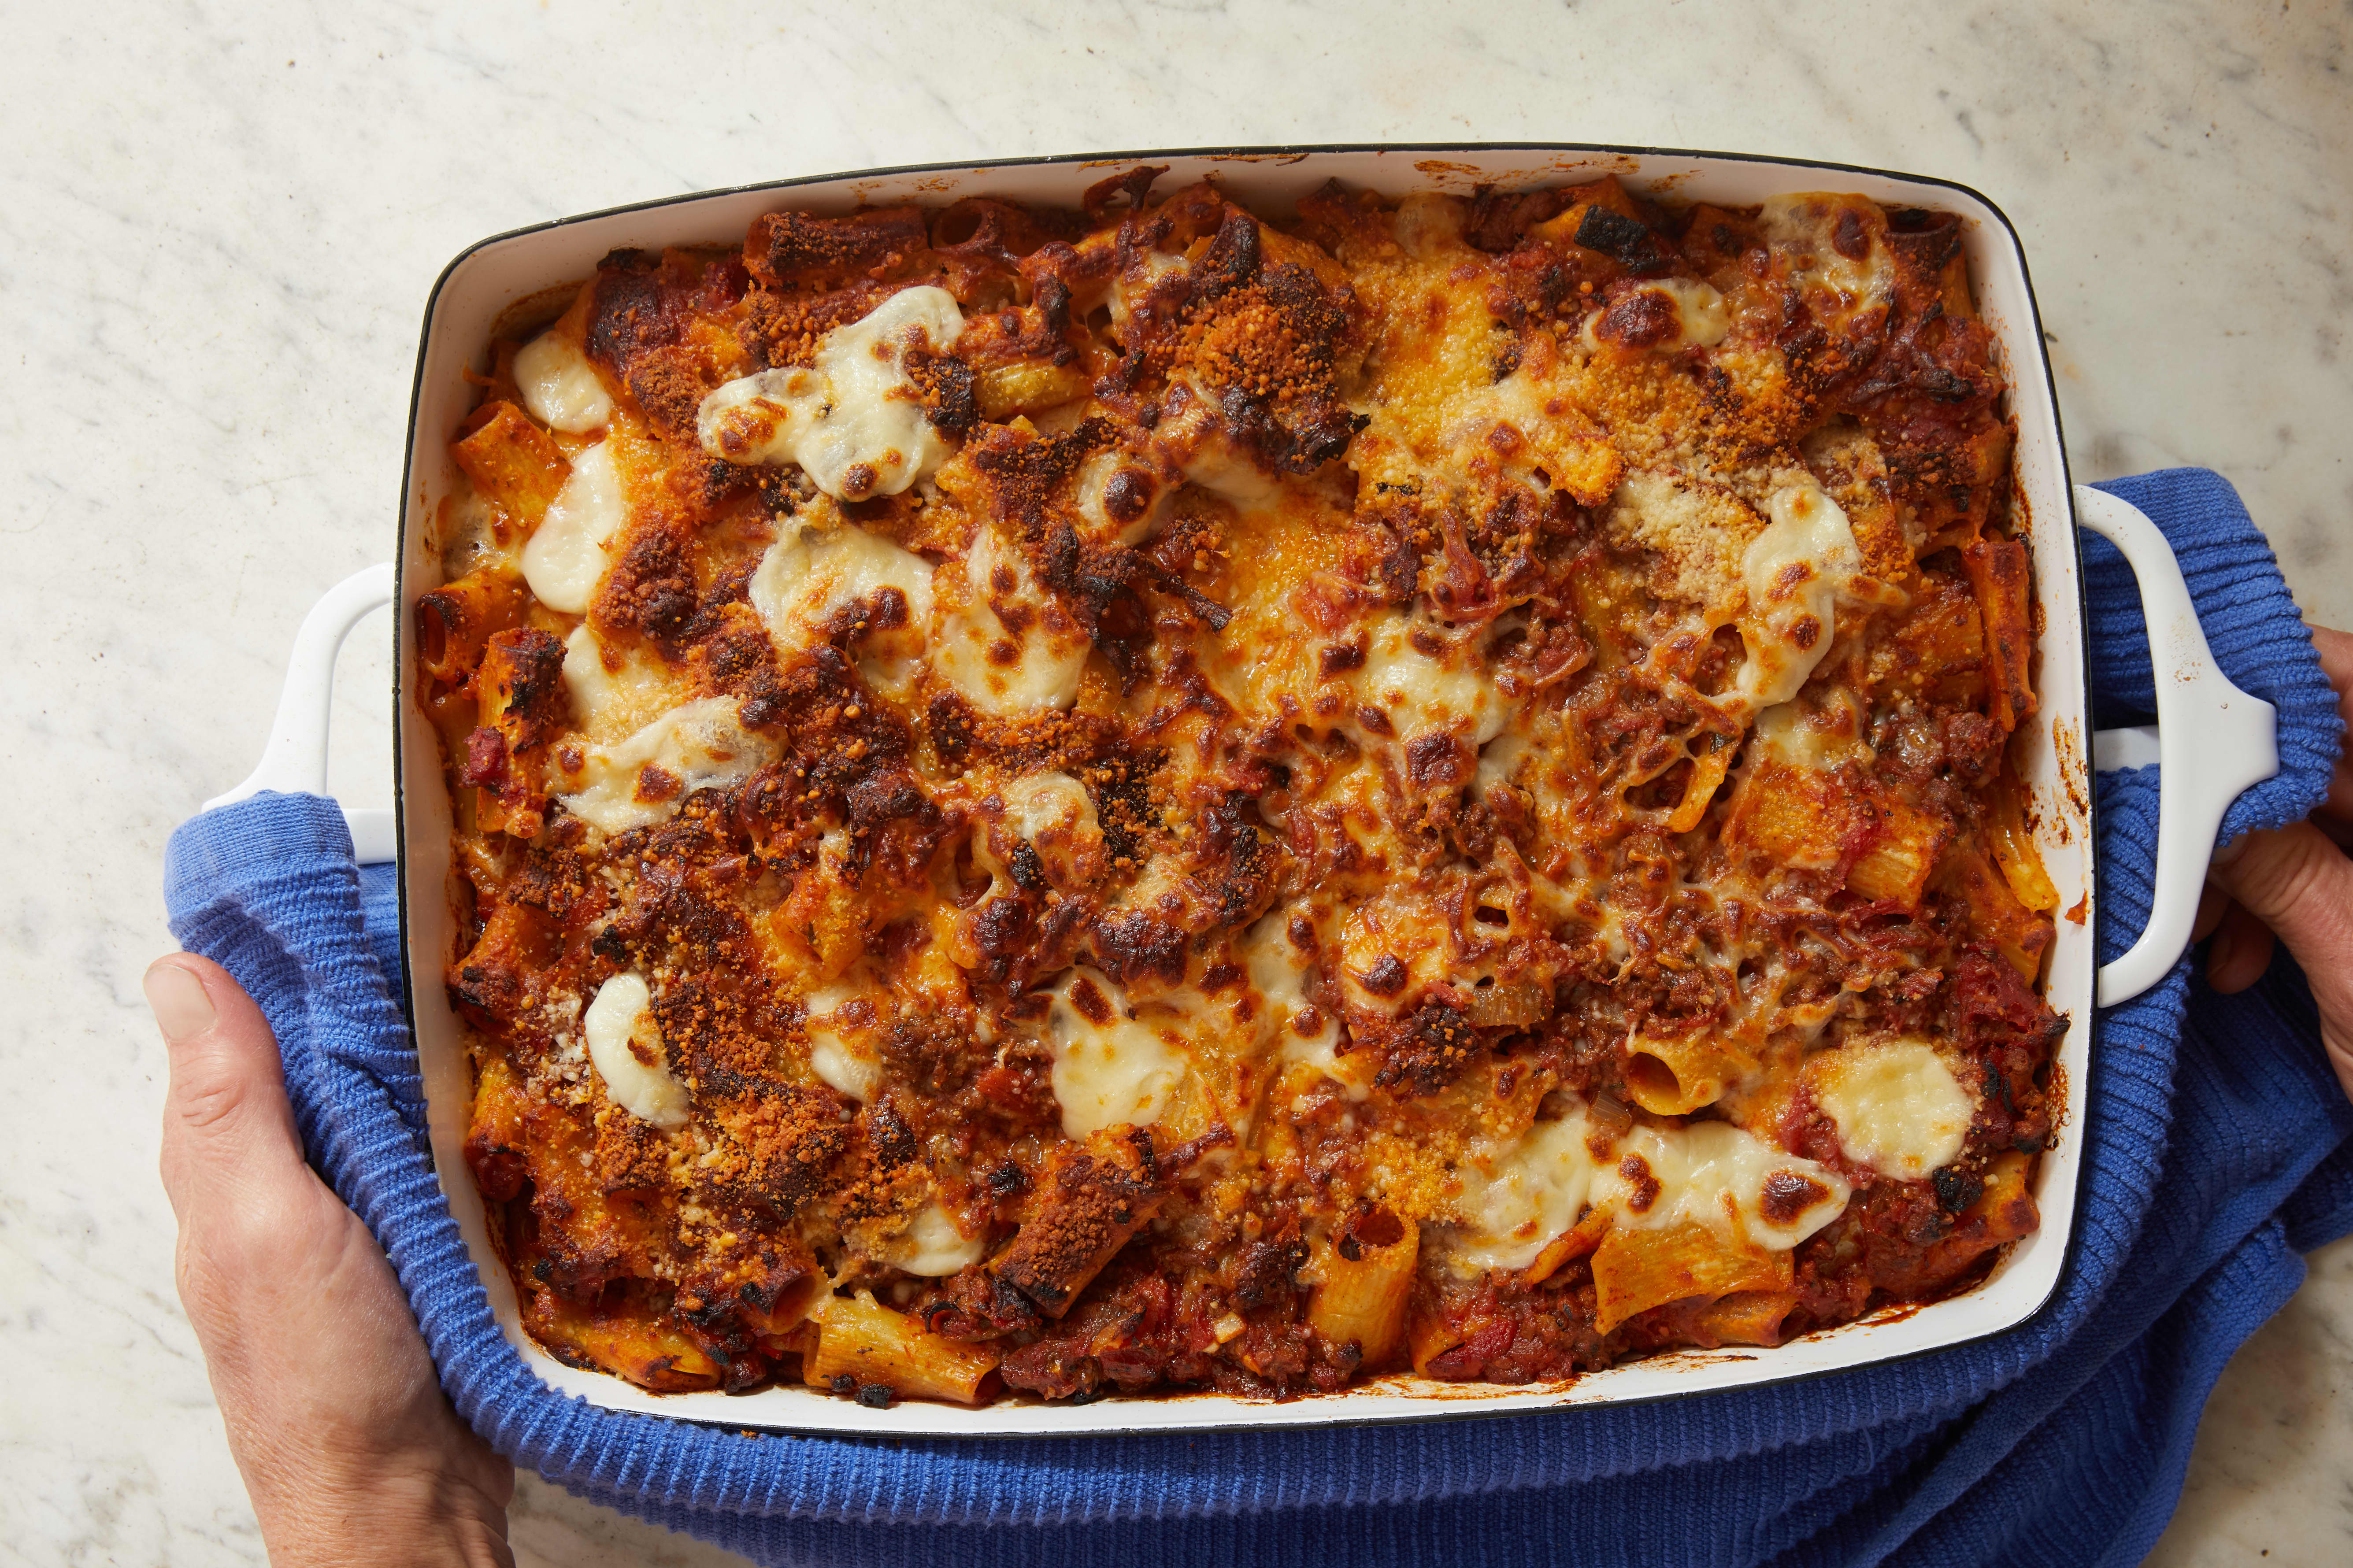 How To Make Cheesy Baked Rigatoni with Beef | Kitchn